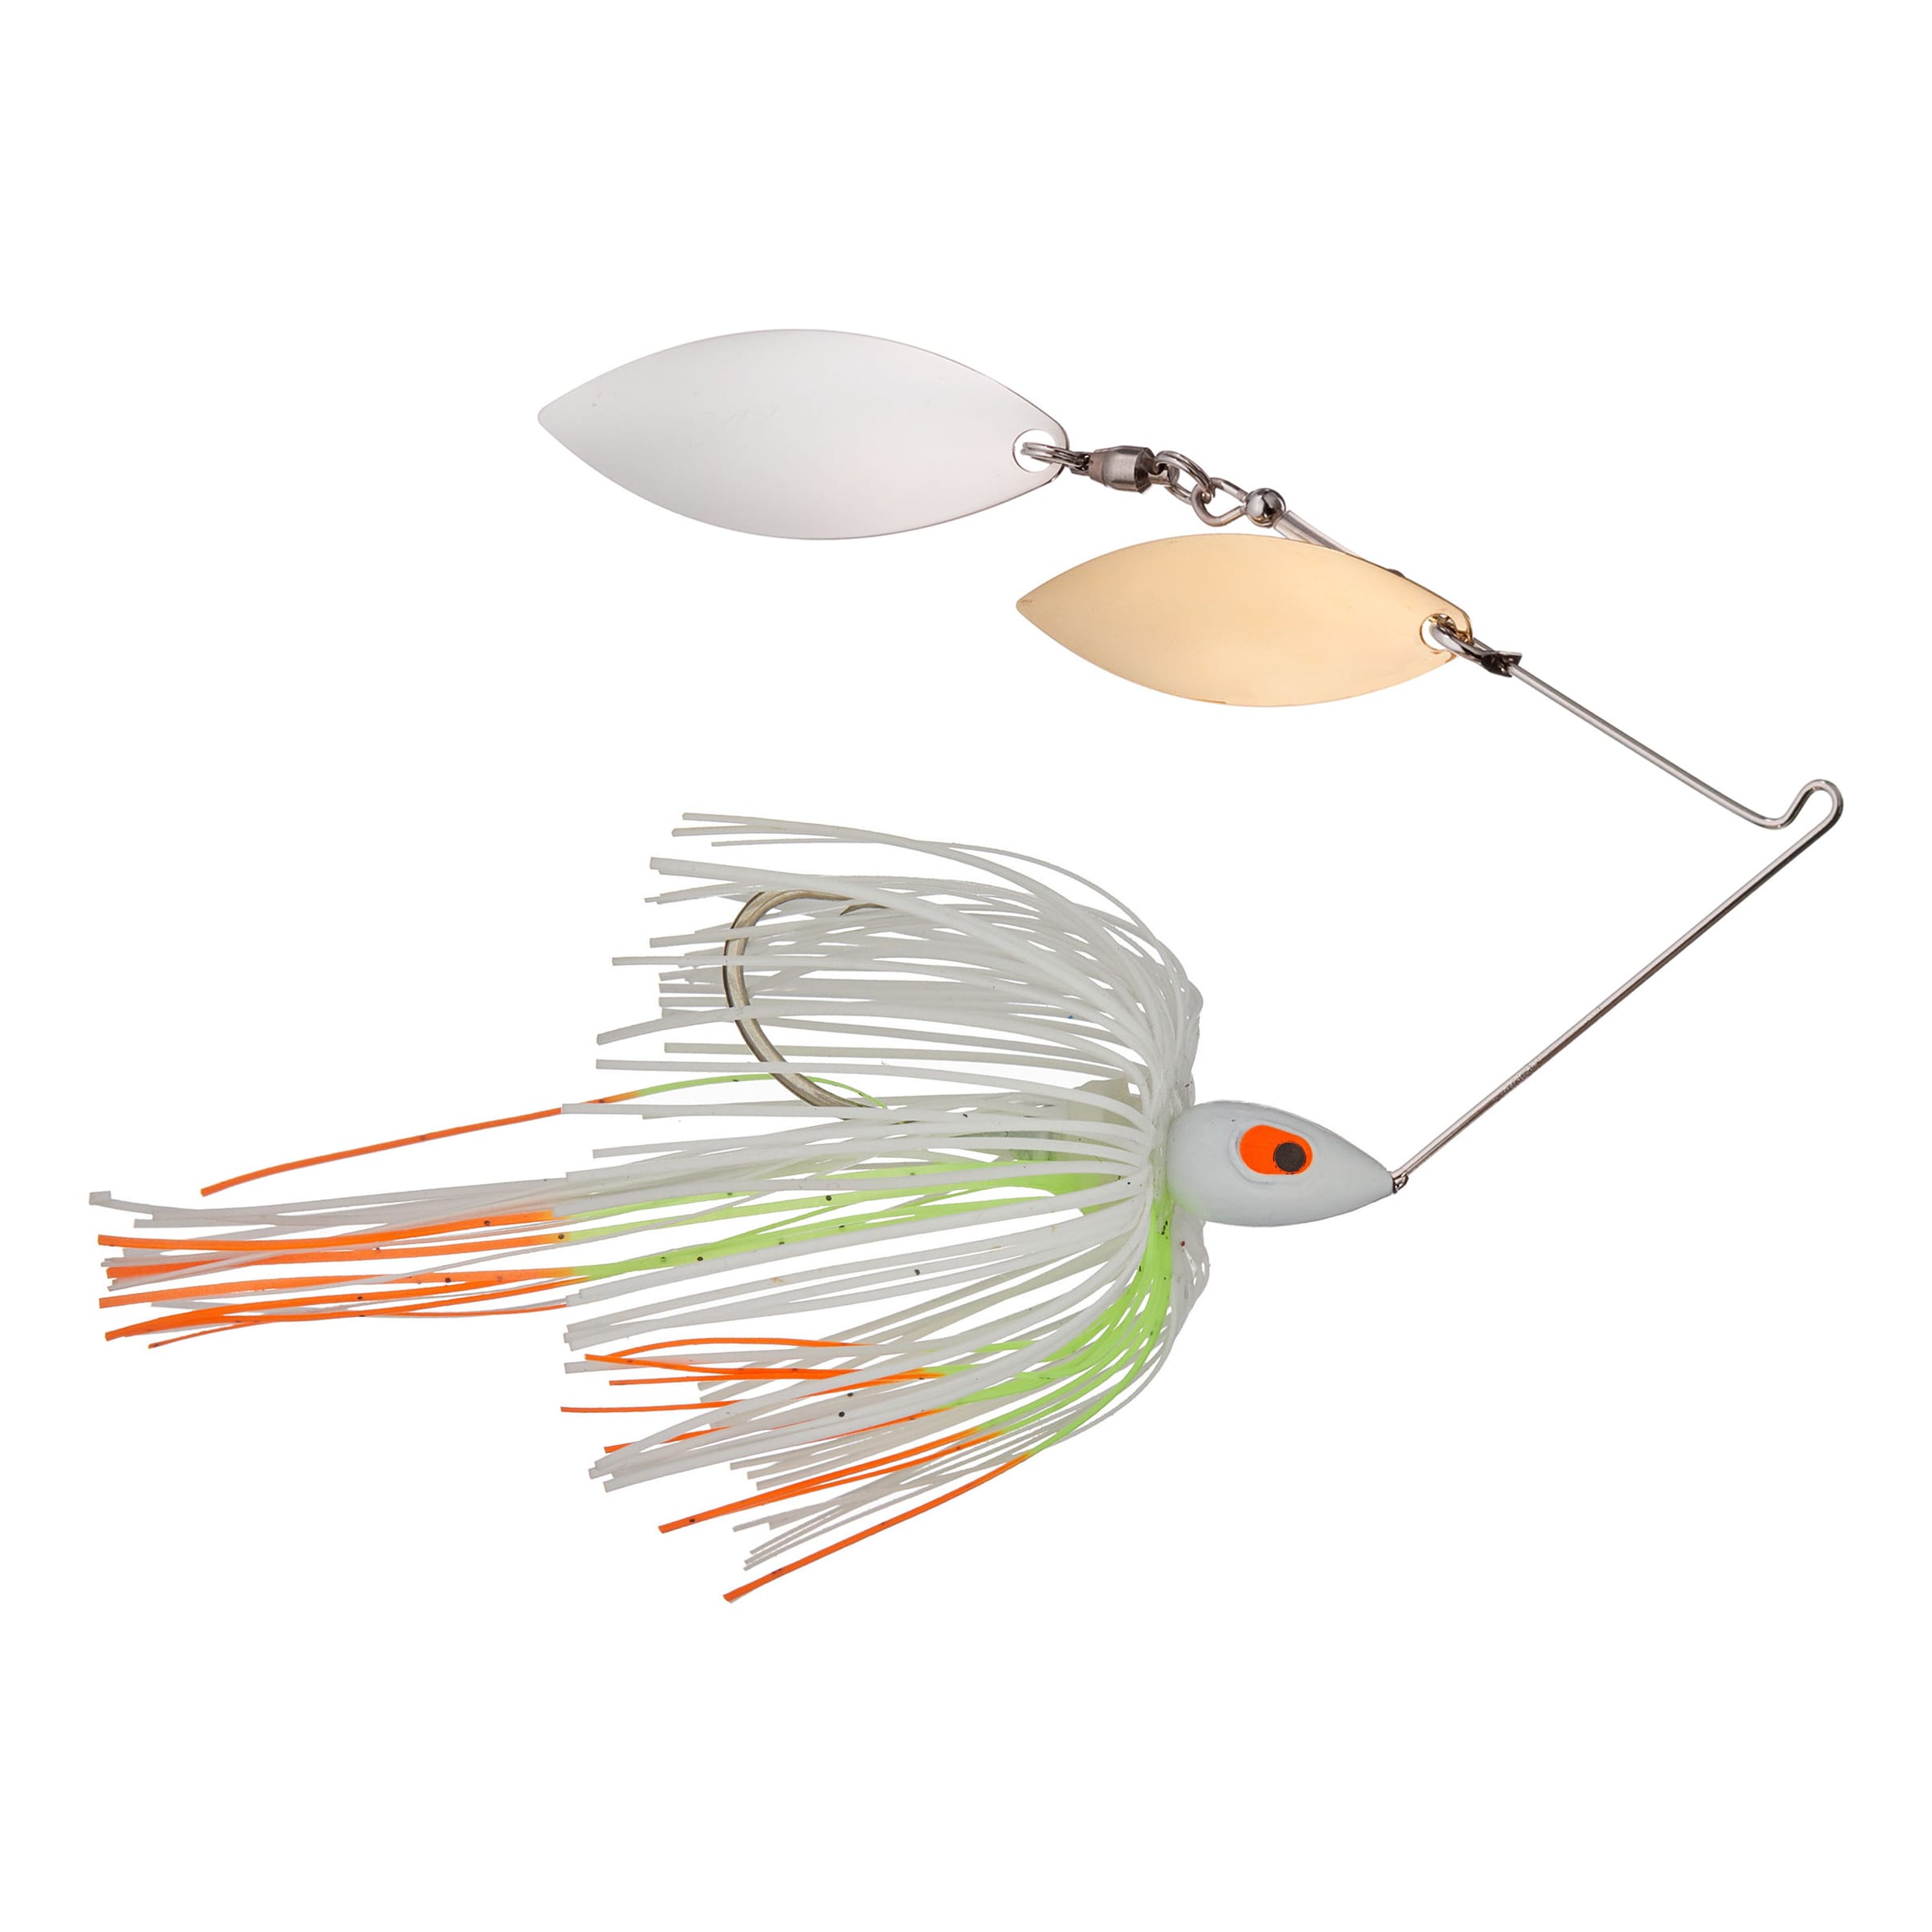 War Eagle Screamin' Eagle Double Willow Spinnerbait